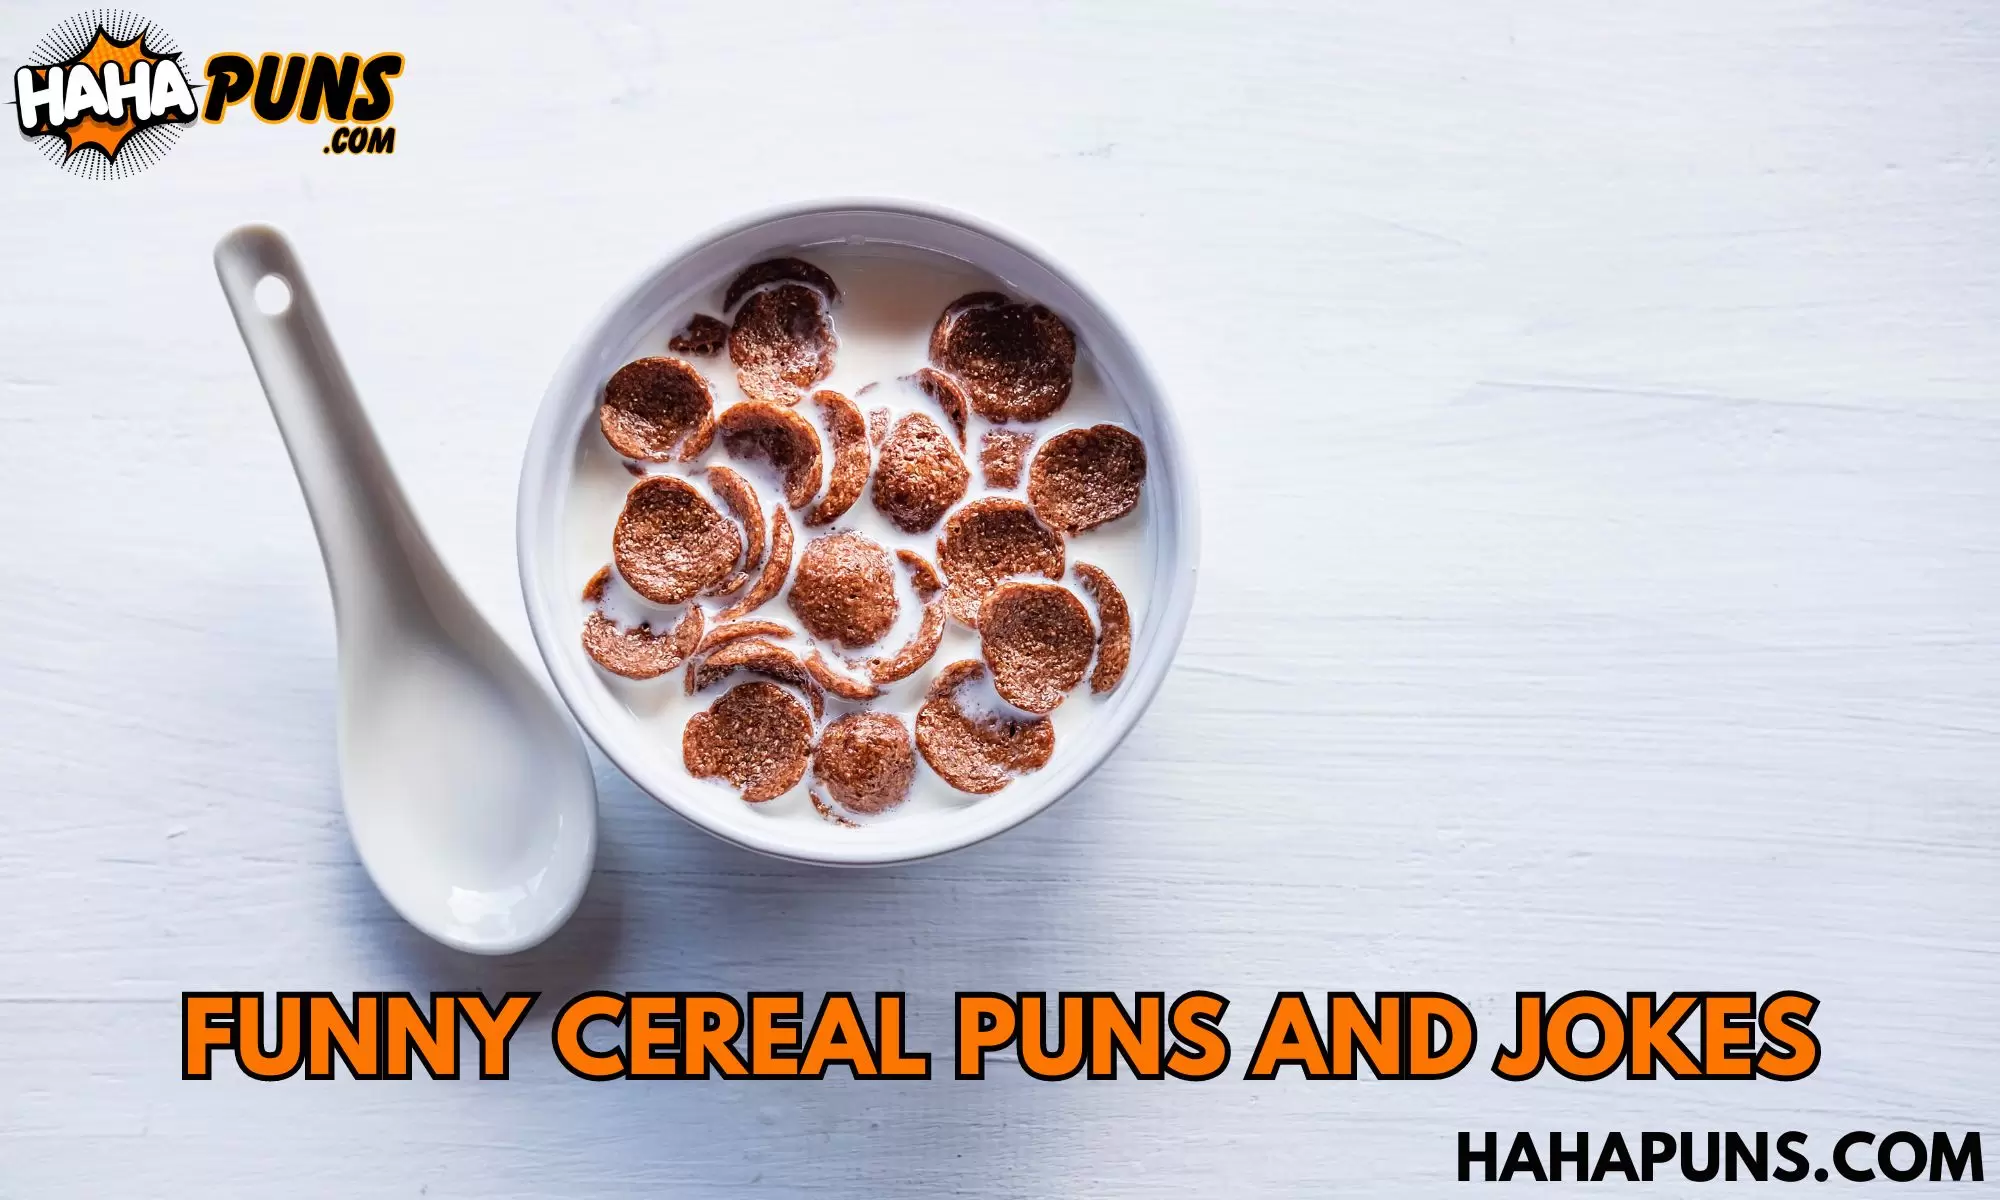 Funny Cereal Puns And Jokes